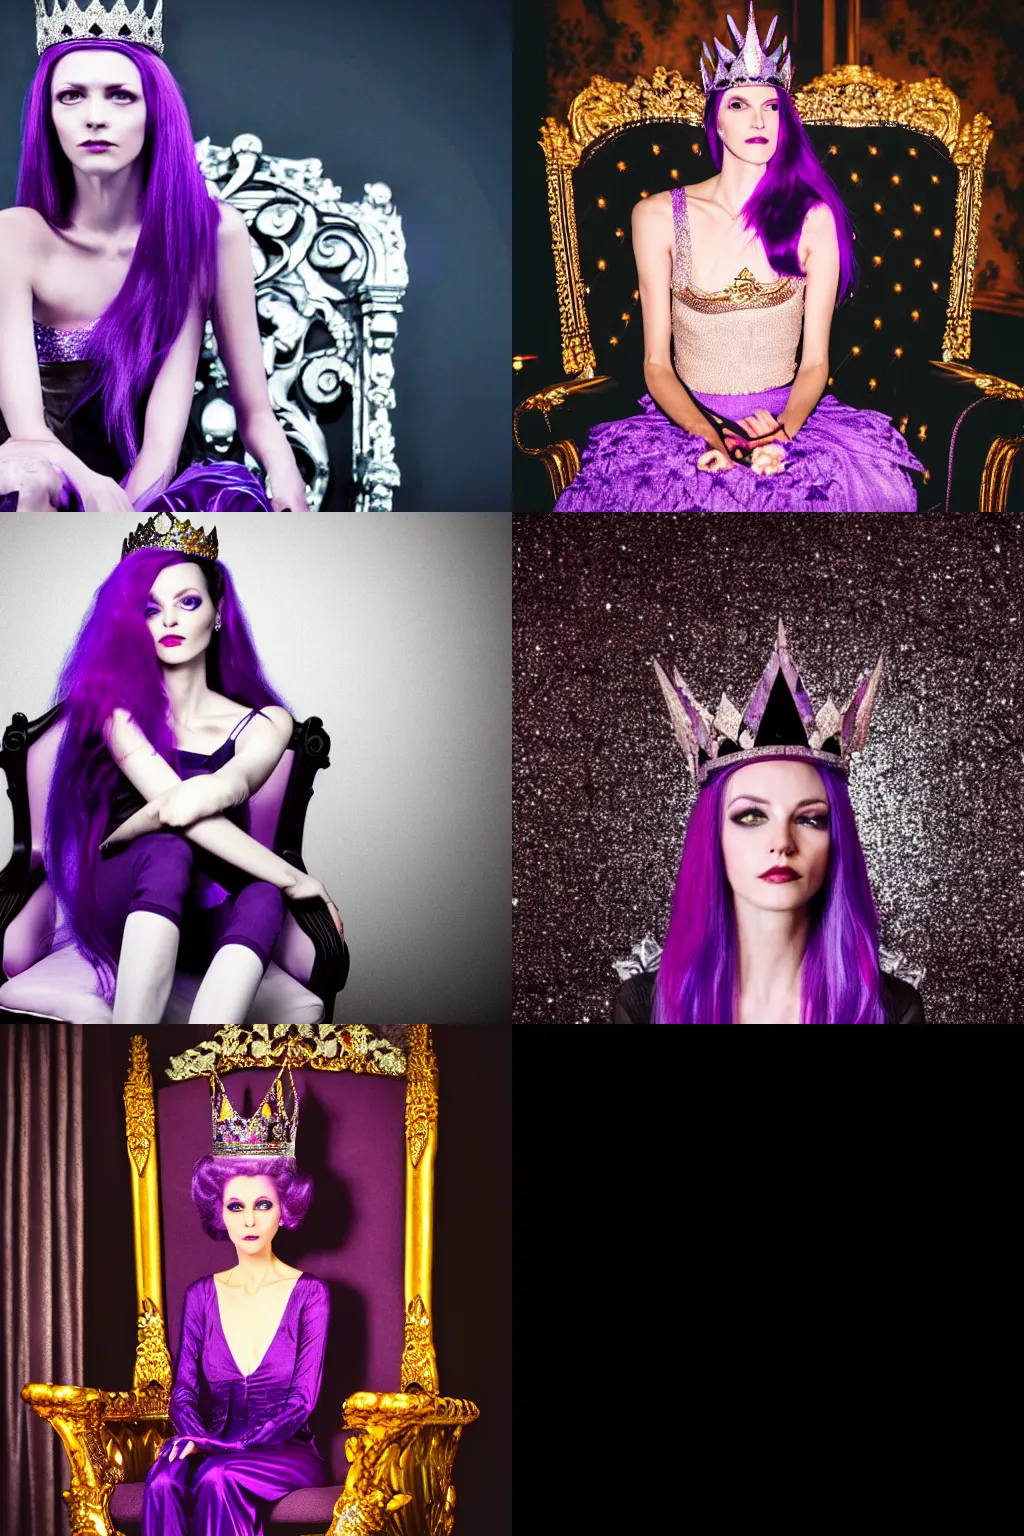 Prompt: A 4k photo of a skinny evil princess woman with purple hair wearing a diamond crown, sitting in a throne in a dark room. Low light